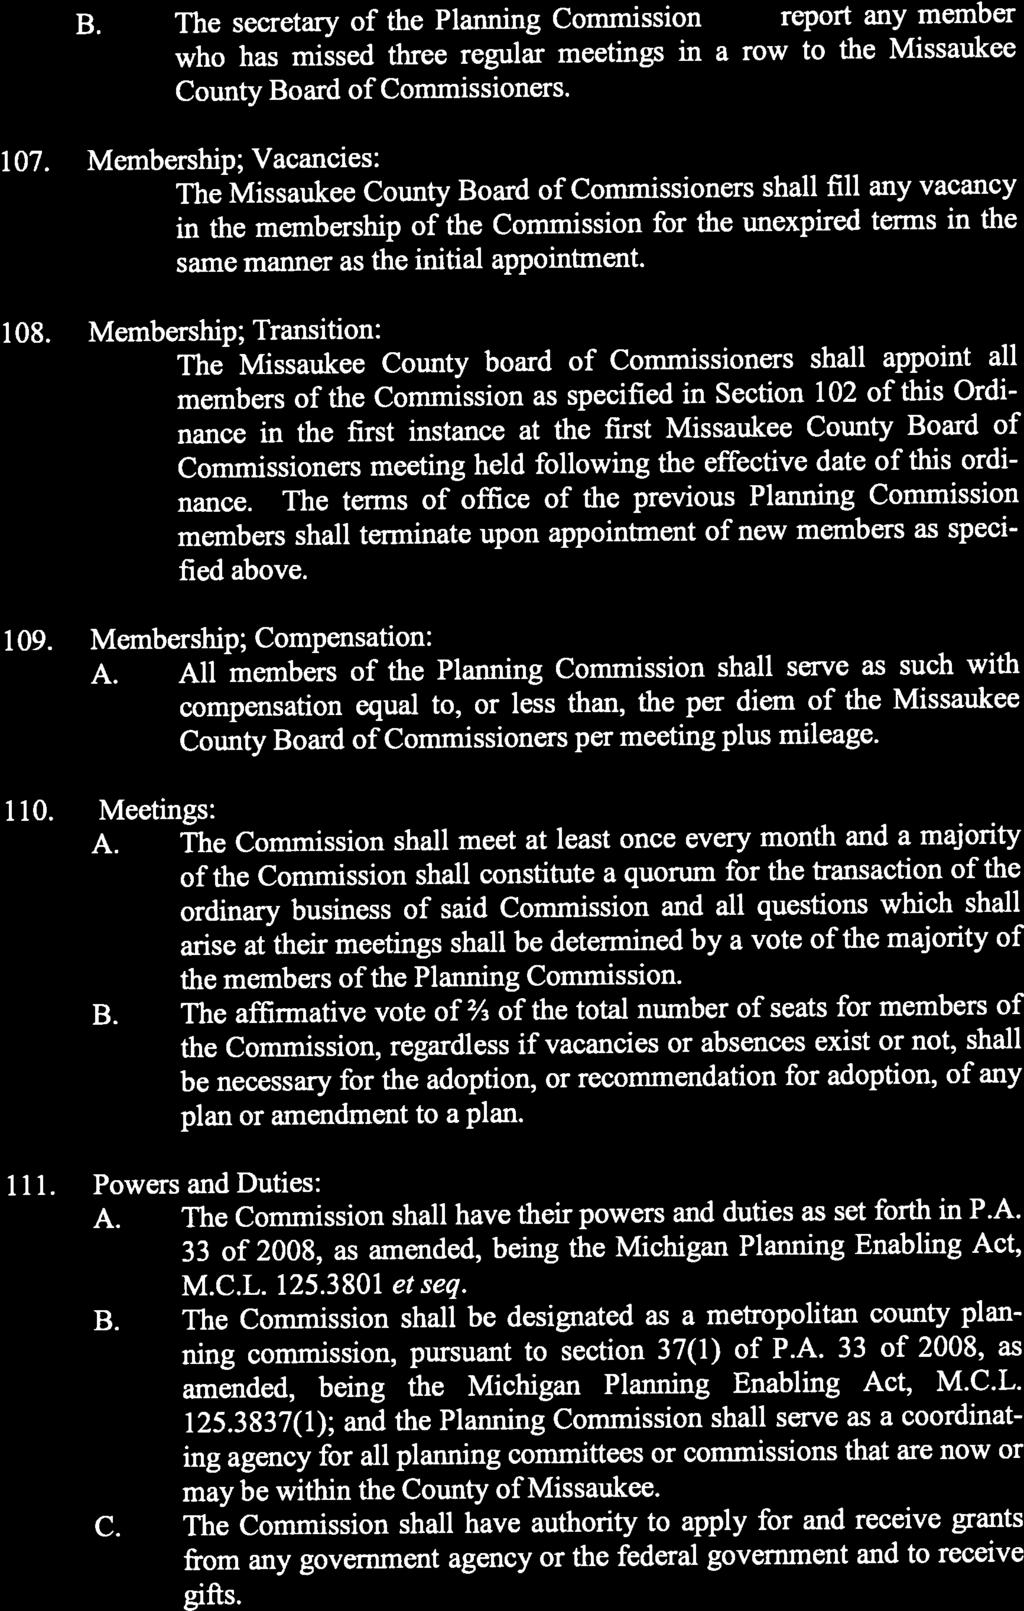 B. The secretary of the Planning Commission shall report any member who has missed three regular meetings in a row to the Missaukee County Board of Commissioners. 107.